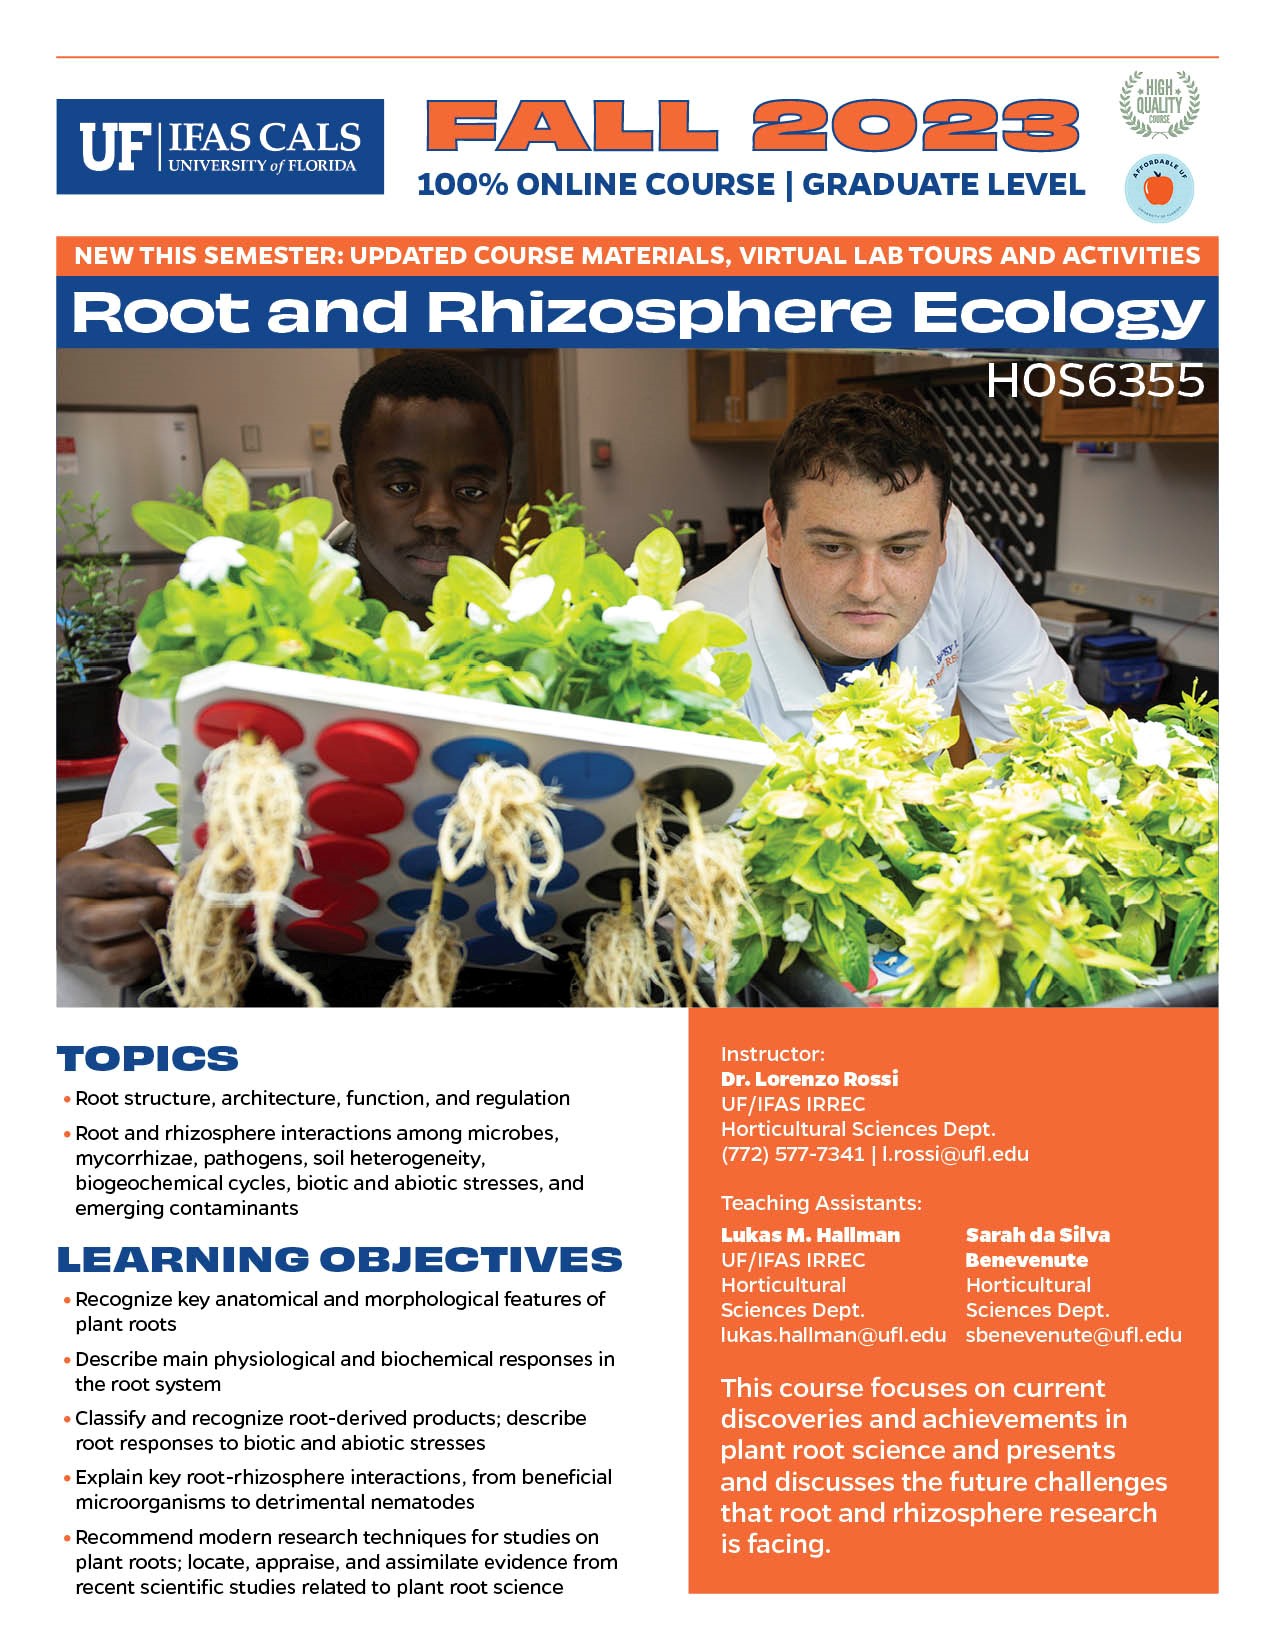 Flyer for the class HOS6355 Root and Rhizosphere Ecology